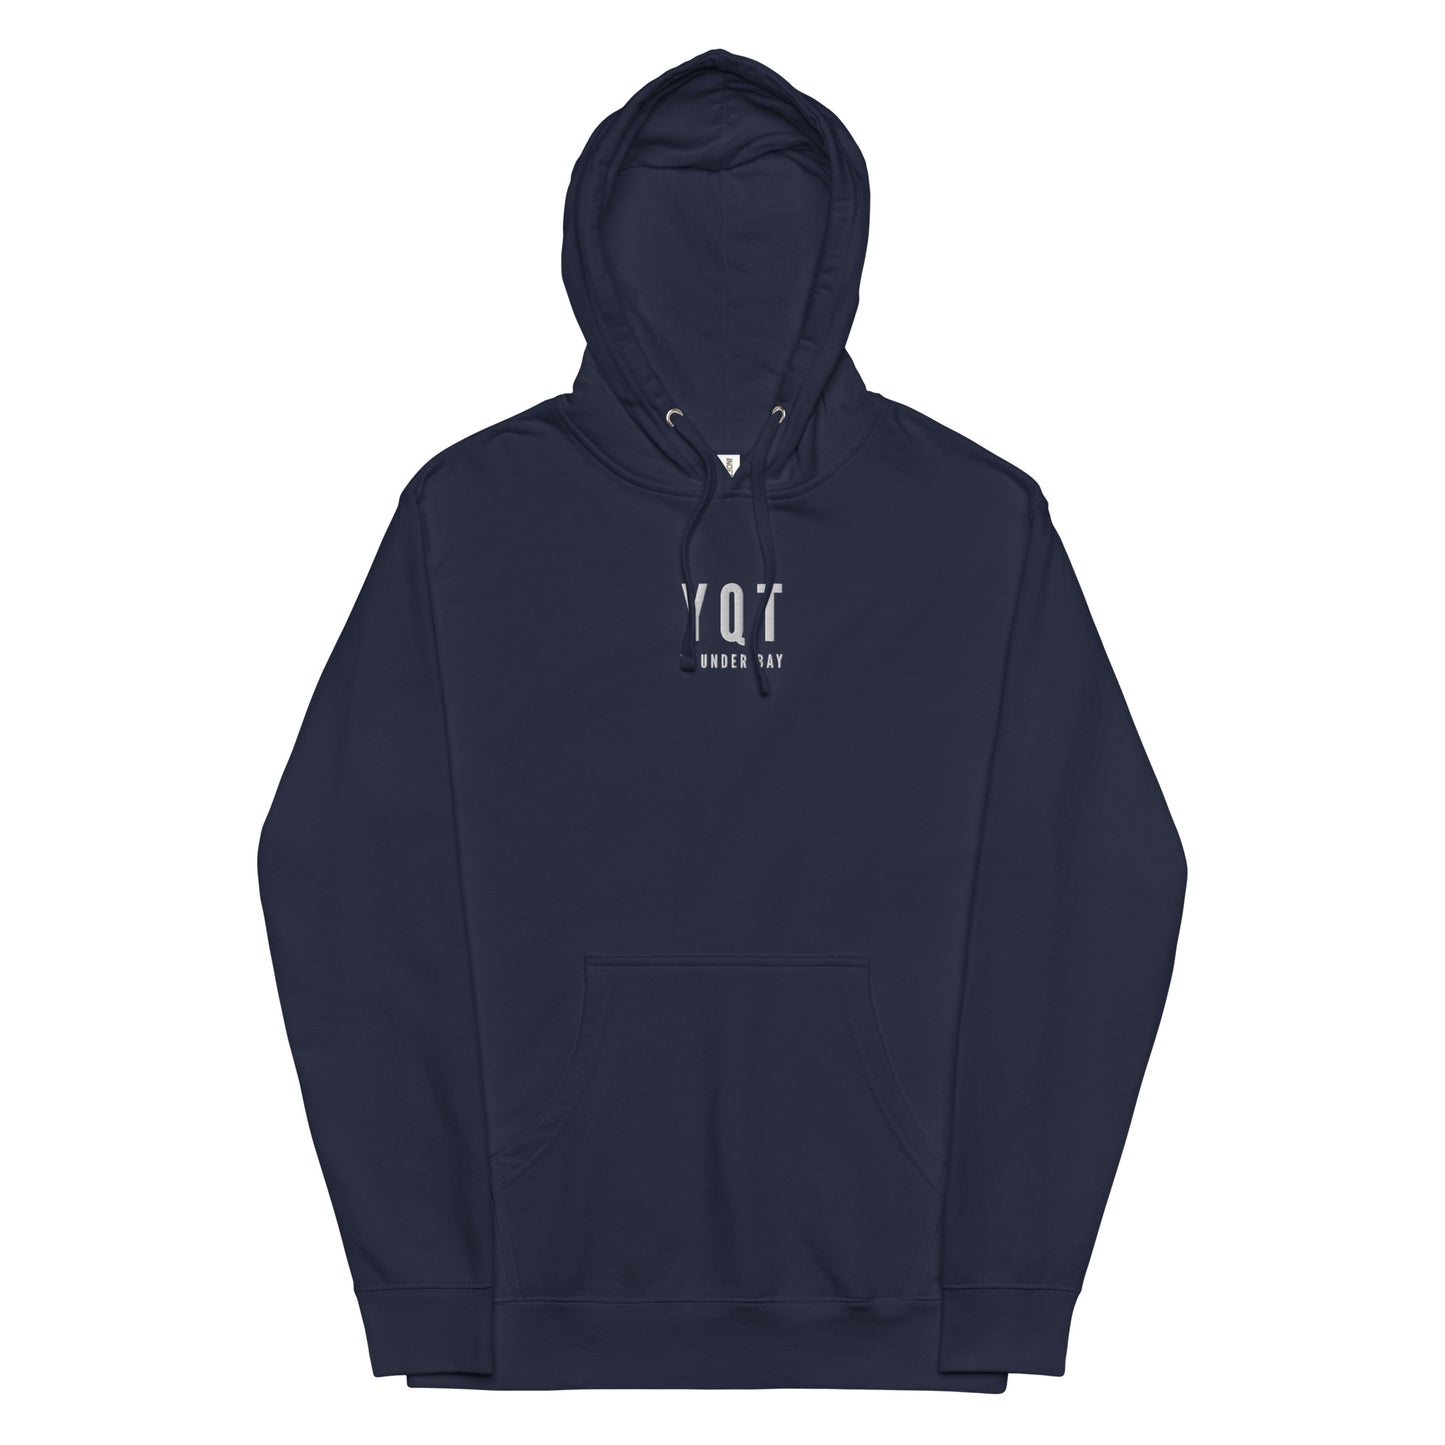 City Midweight Hoodie - White • YQT Thunder Bay • YHM Designs - Image 11